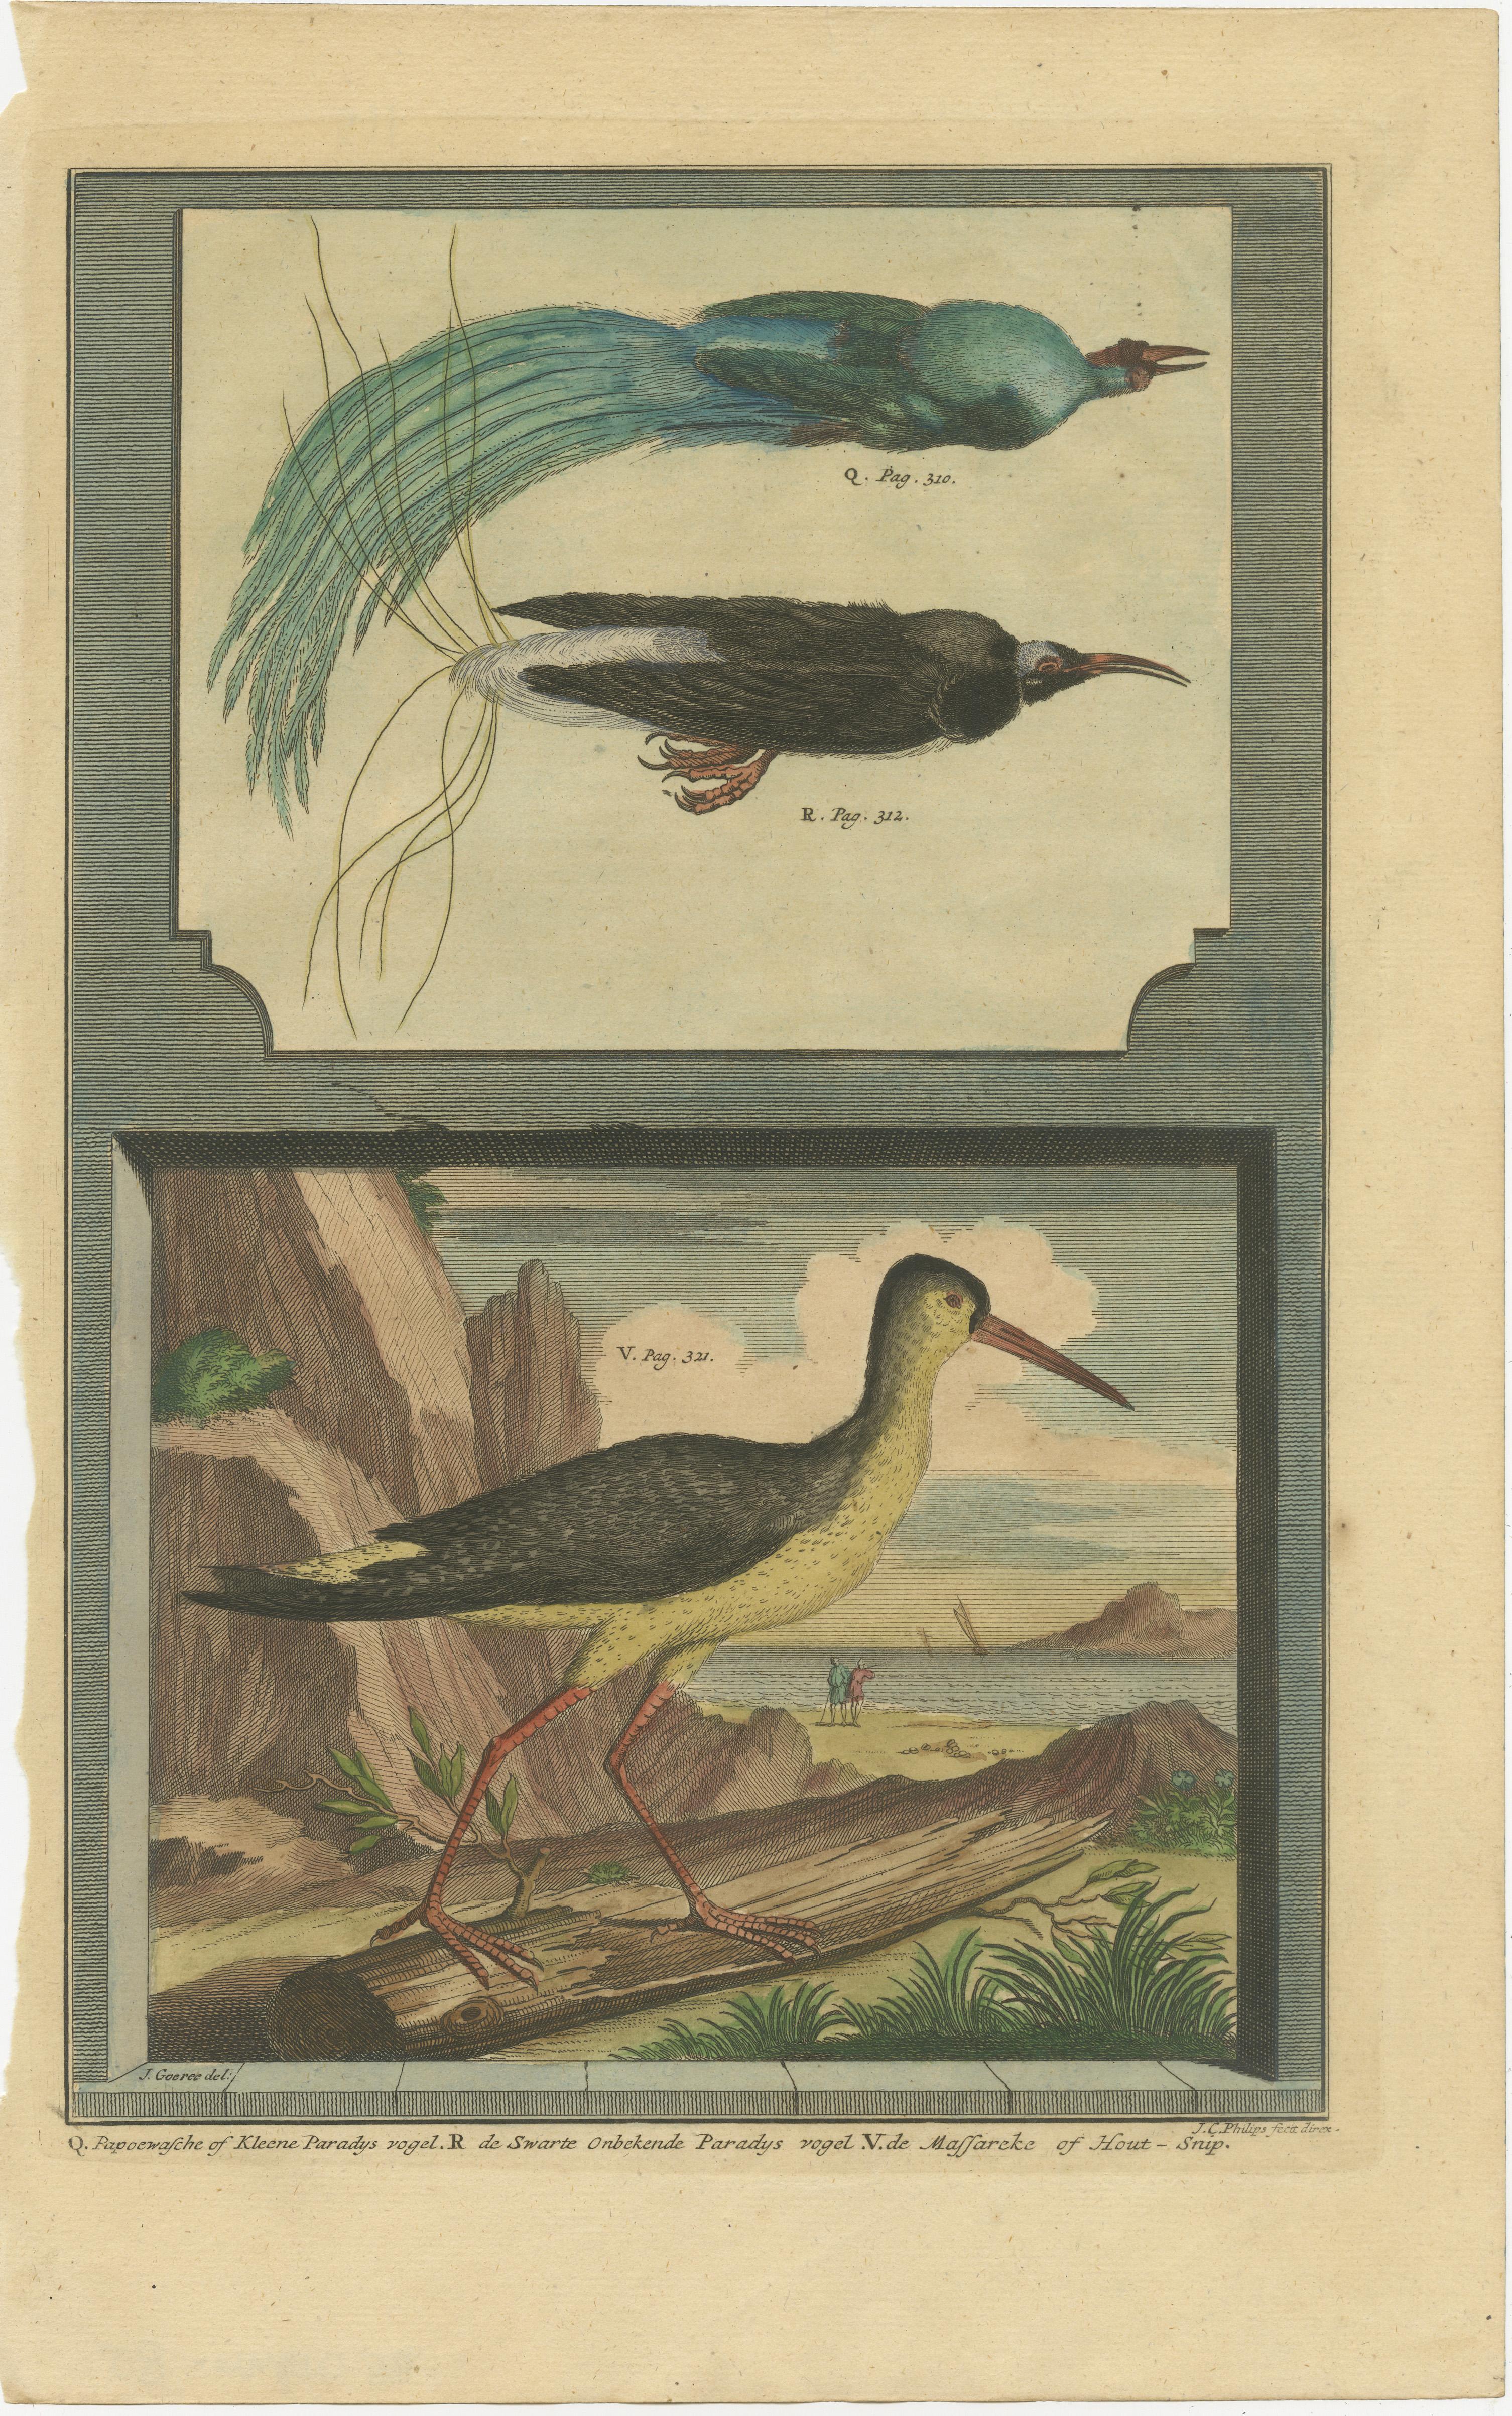 Antique print titled 'Q. Papoewasche of Kleene Paradijs Vogel (..)'. This print depicts birds of paradise and the Eurasian woodcock (Scolopax rusticola), native to South East Asia/Indonesia. This print originates from 'Oud en Nieuw Oost-Indiën' by